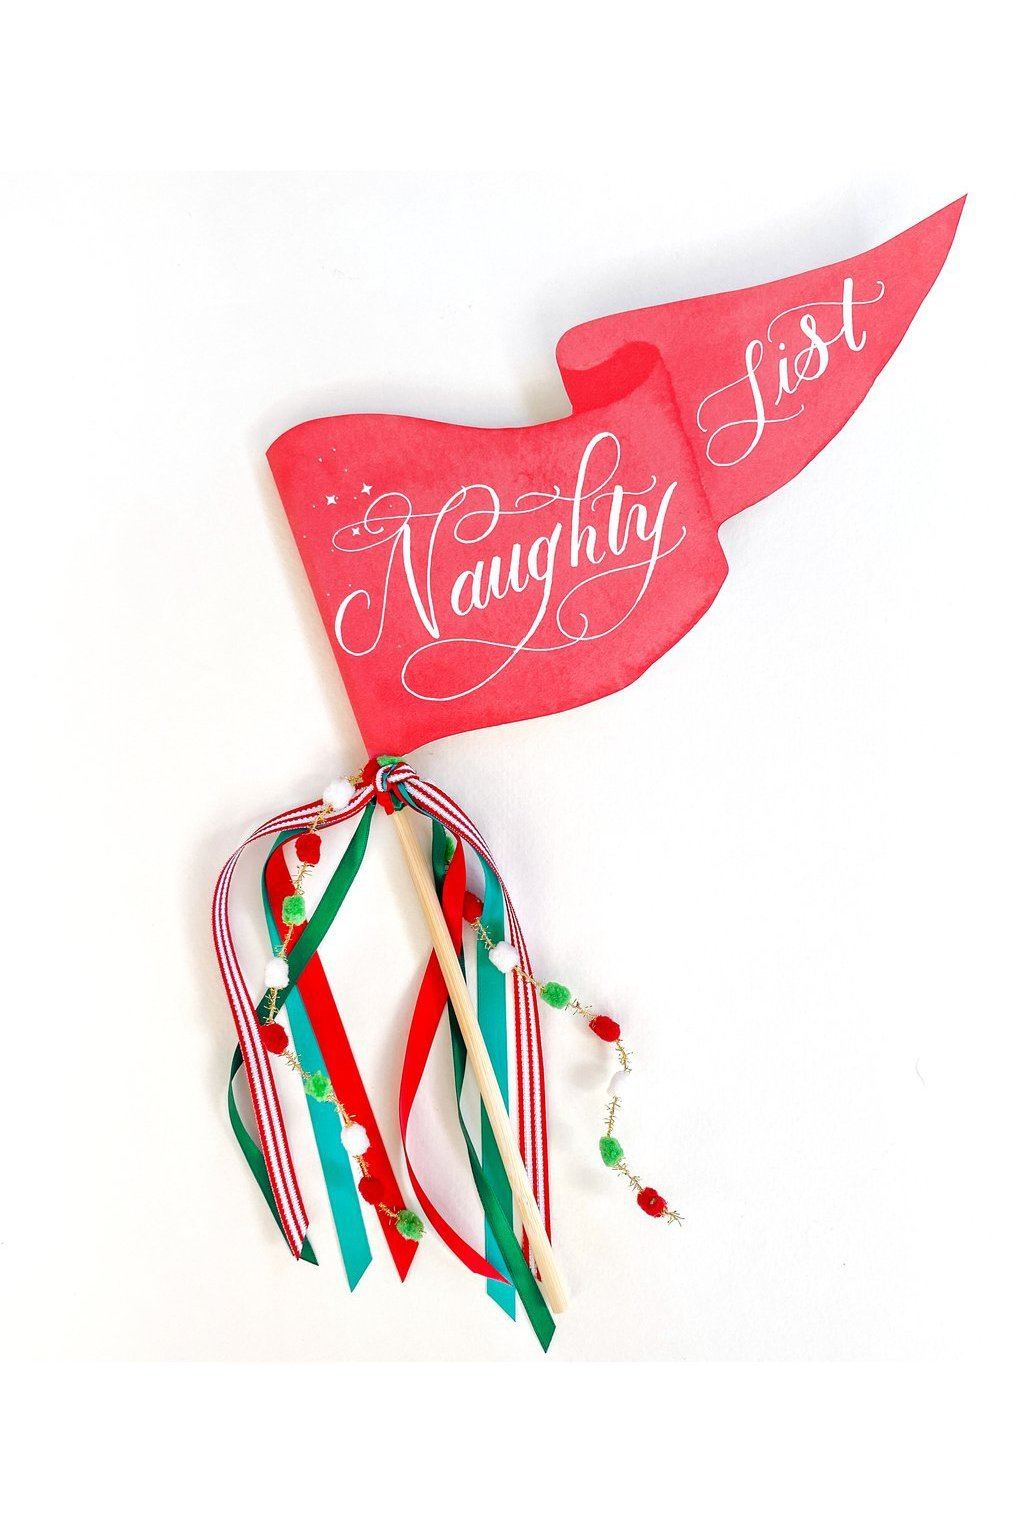 Naughty List Party Pennant - Tea for Three: A Children's Boutique-New Arrivals-TheT43Shop